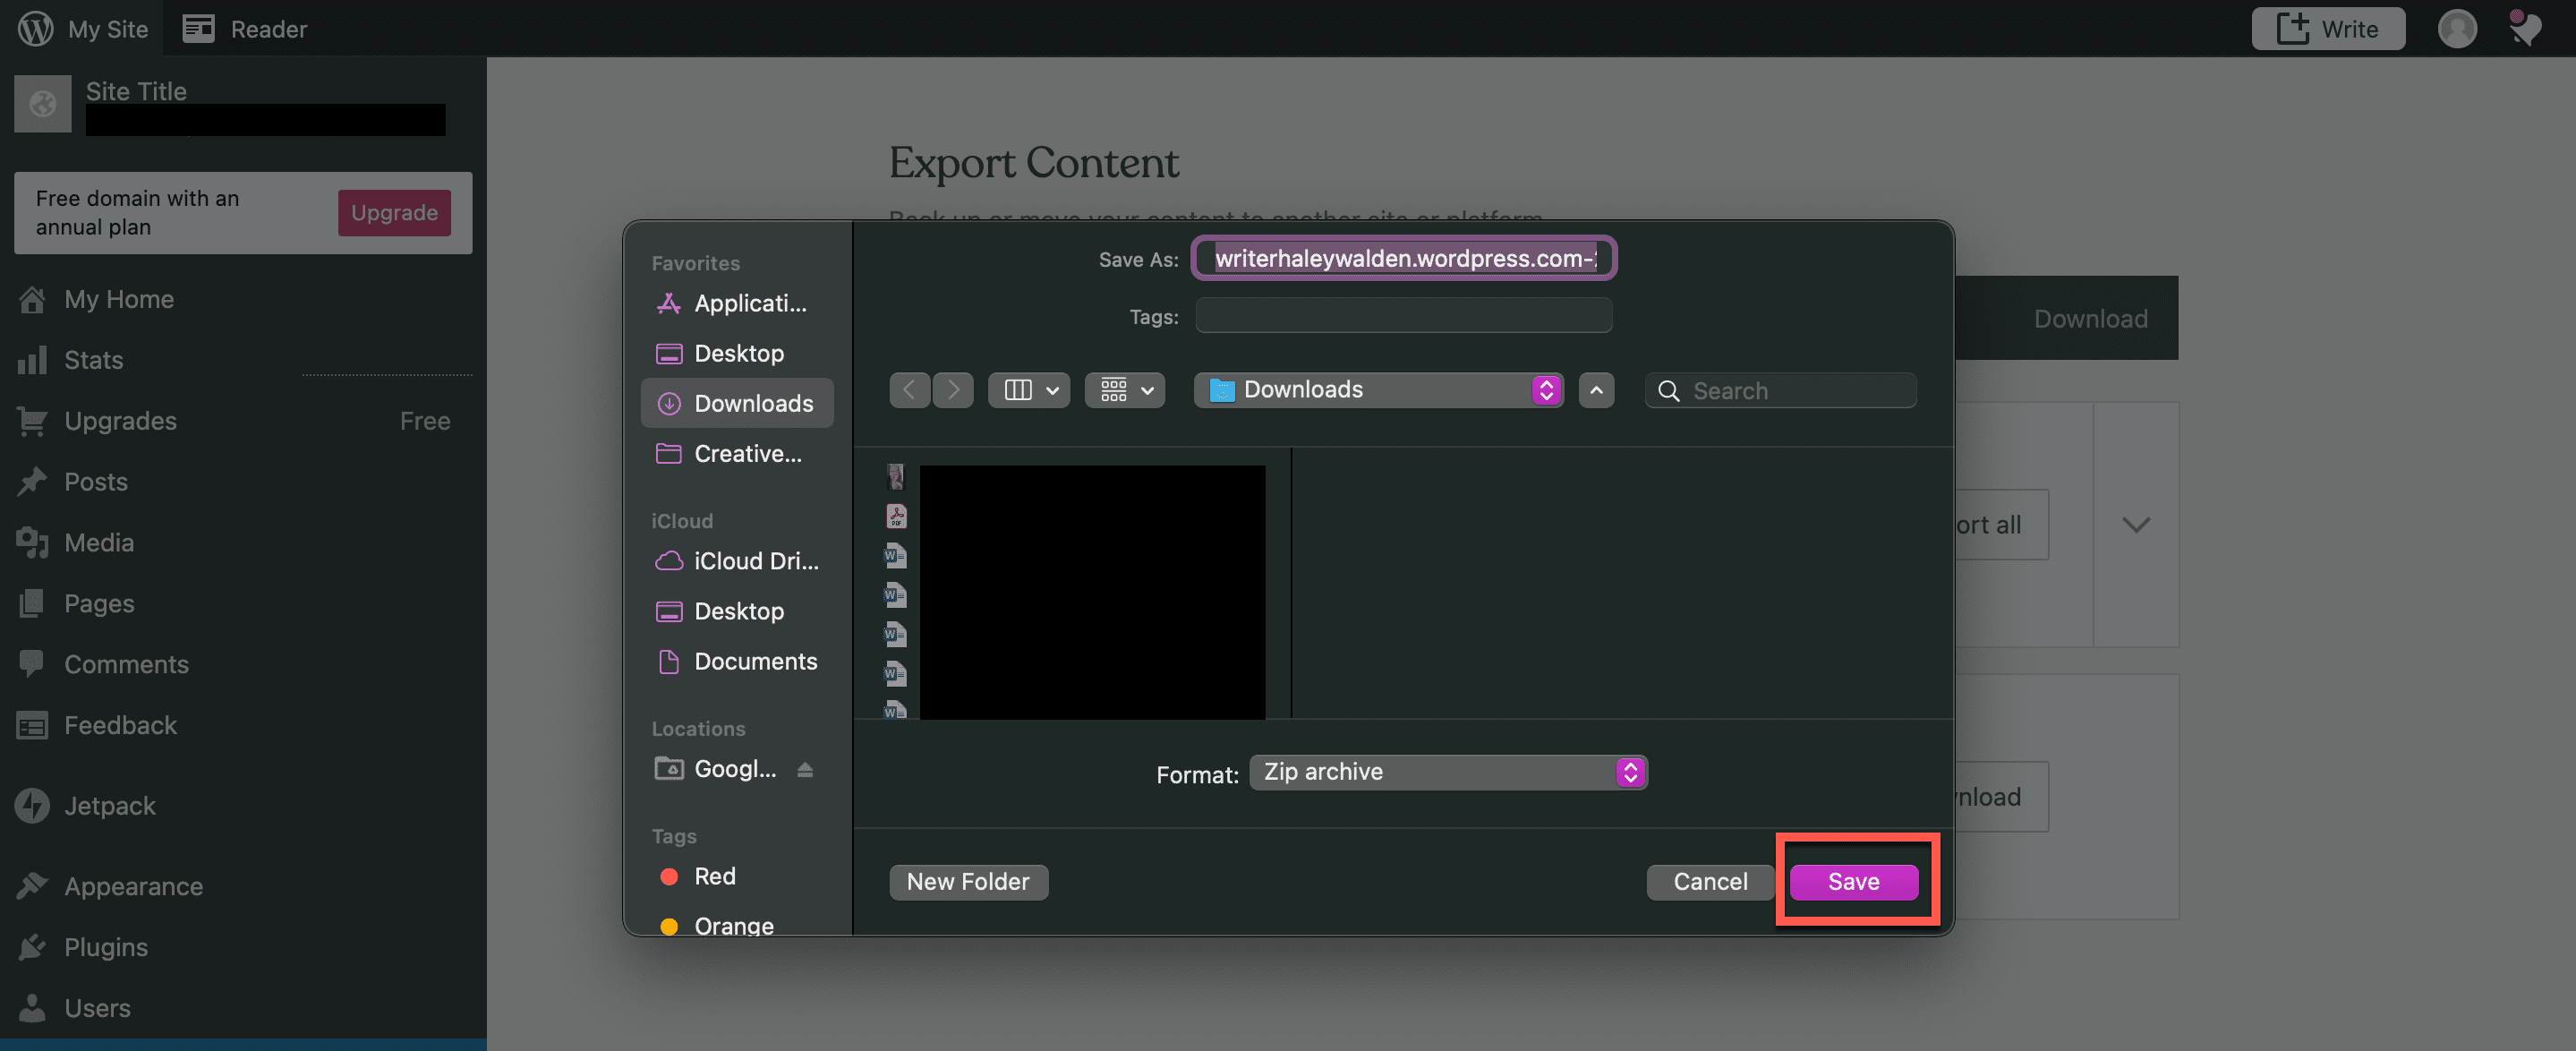 How to Use the WordPress Export Tool 4